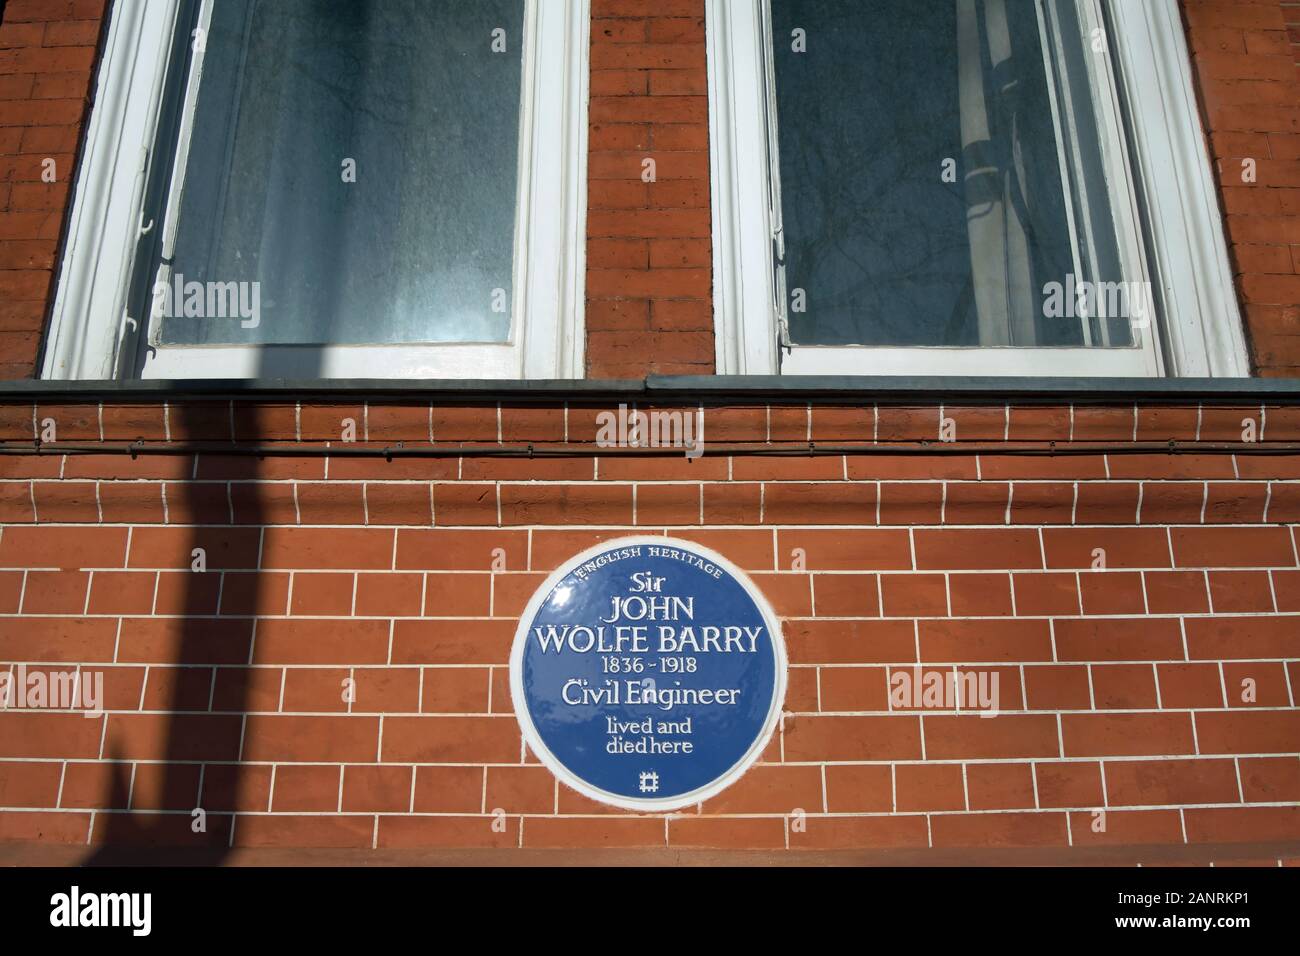 english heritage blue plaque marking a home of civil engineer sir john wolfe barry, chelsea embankment, london, england Stock Photo